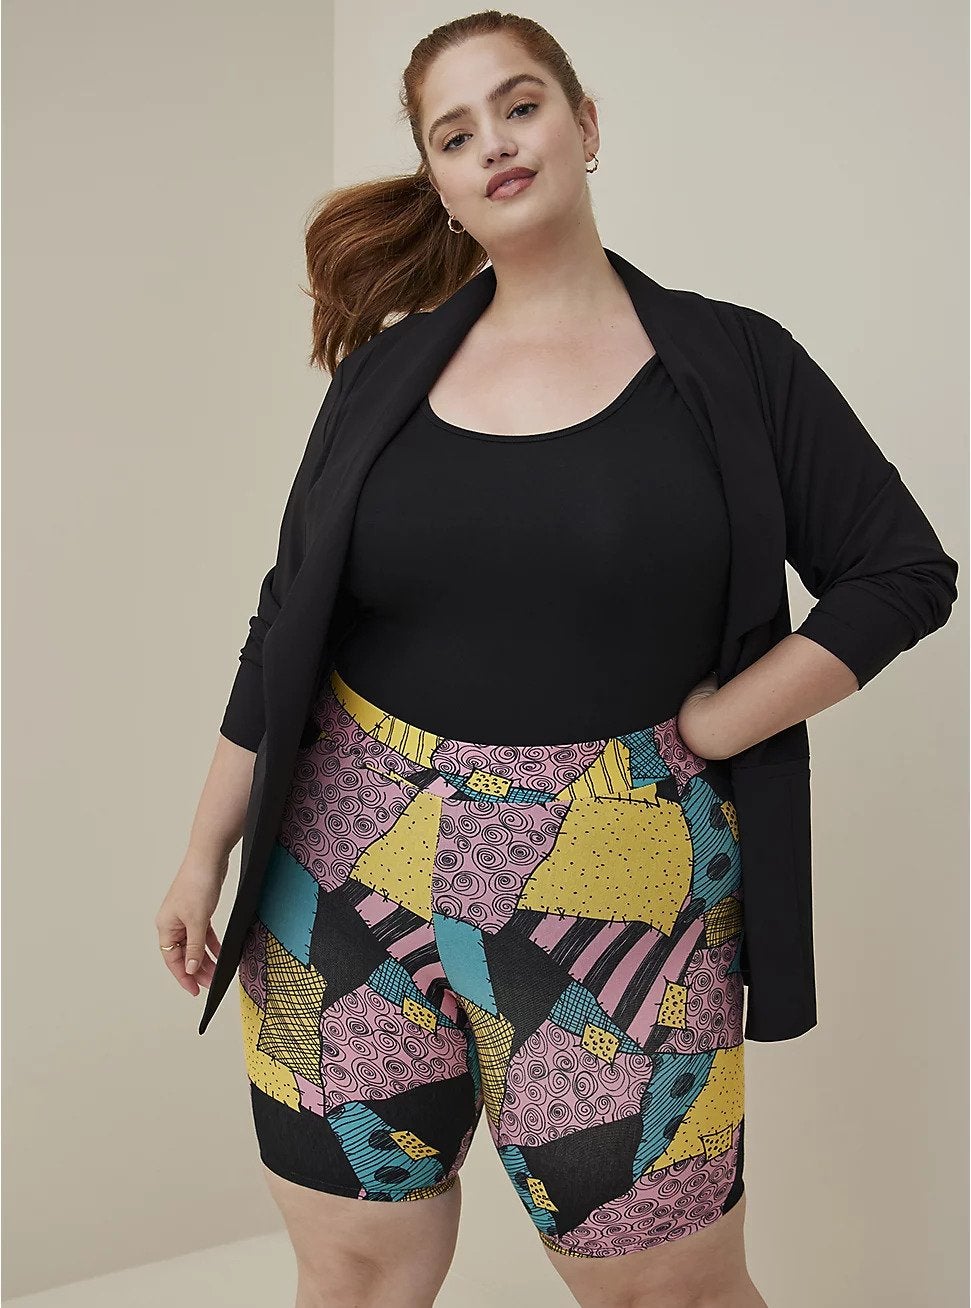 24 Plus-Size Fashion Buys For The Summer